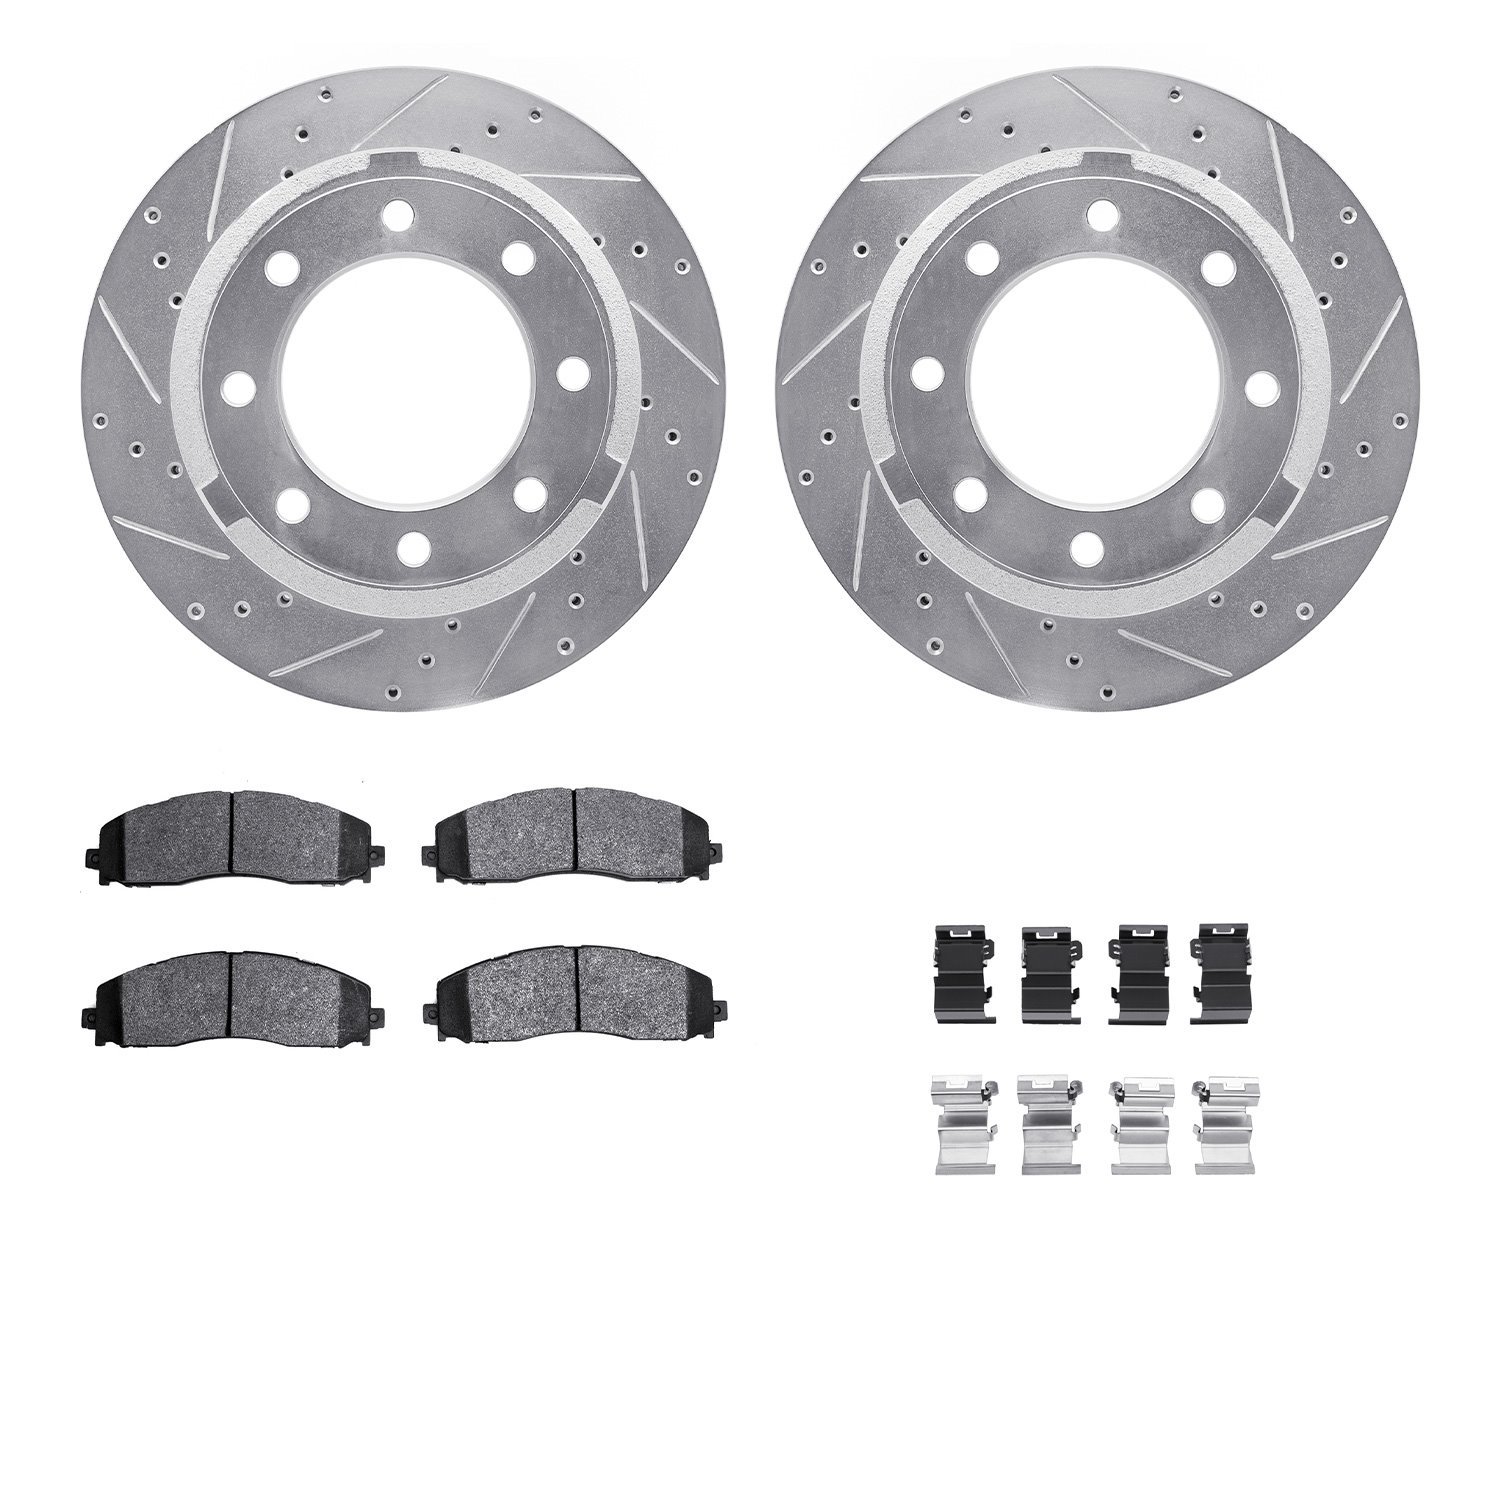 7412-54102 Drilled/Slotted Brake Rotors with Ultimate-Duty Brake Pads Kit & Hardware [Silver], Fits Select Ford/Lincoln/Mercury/